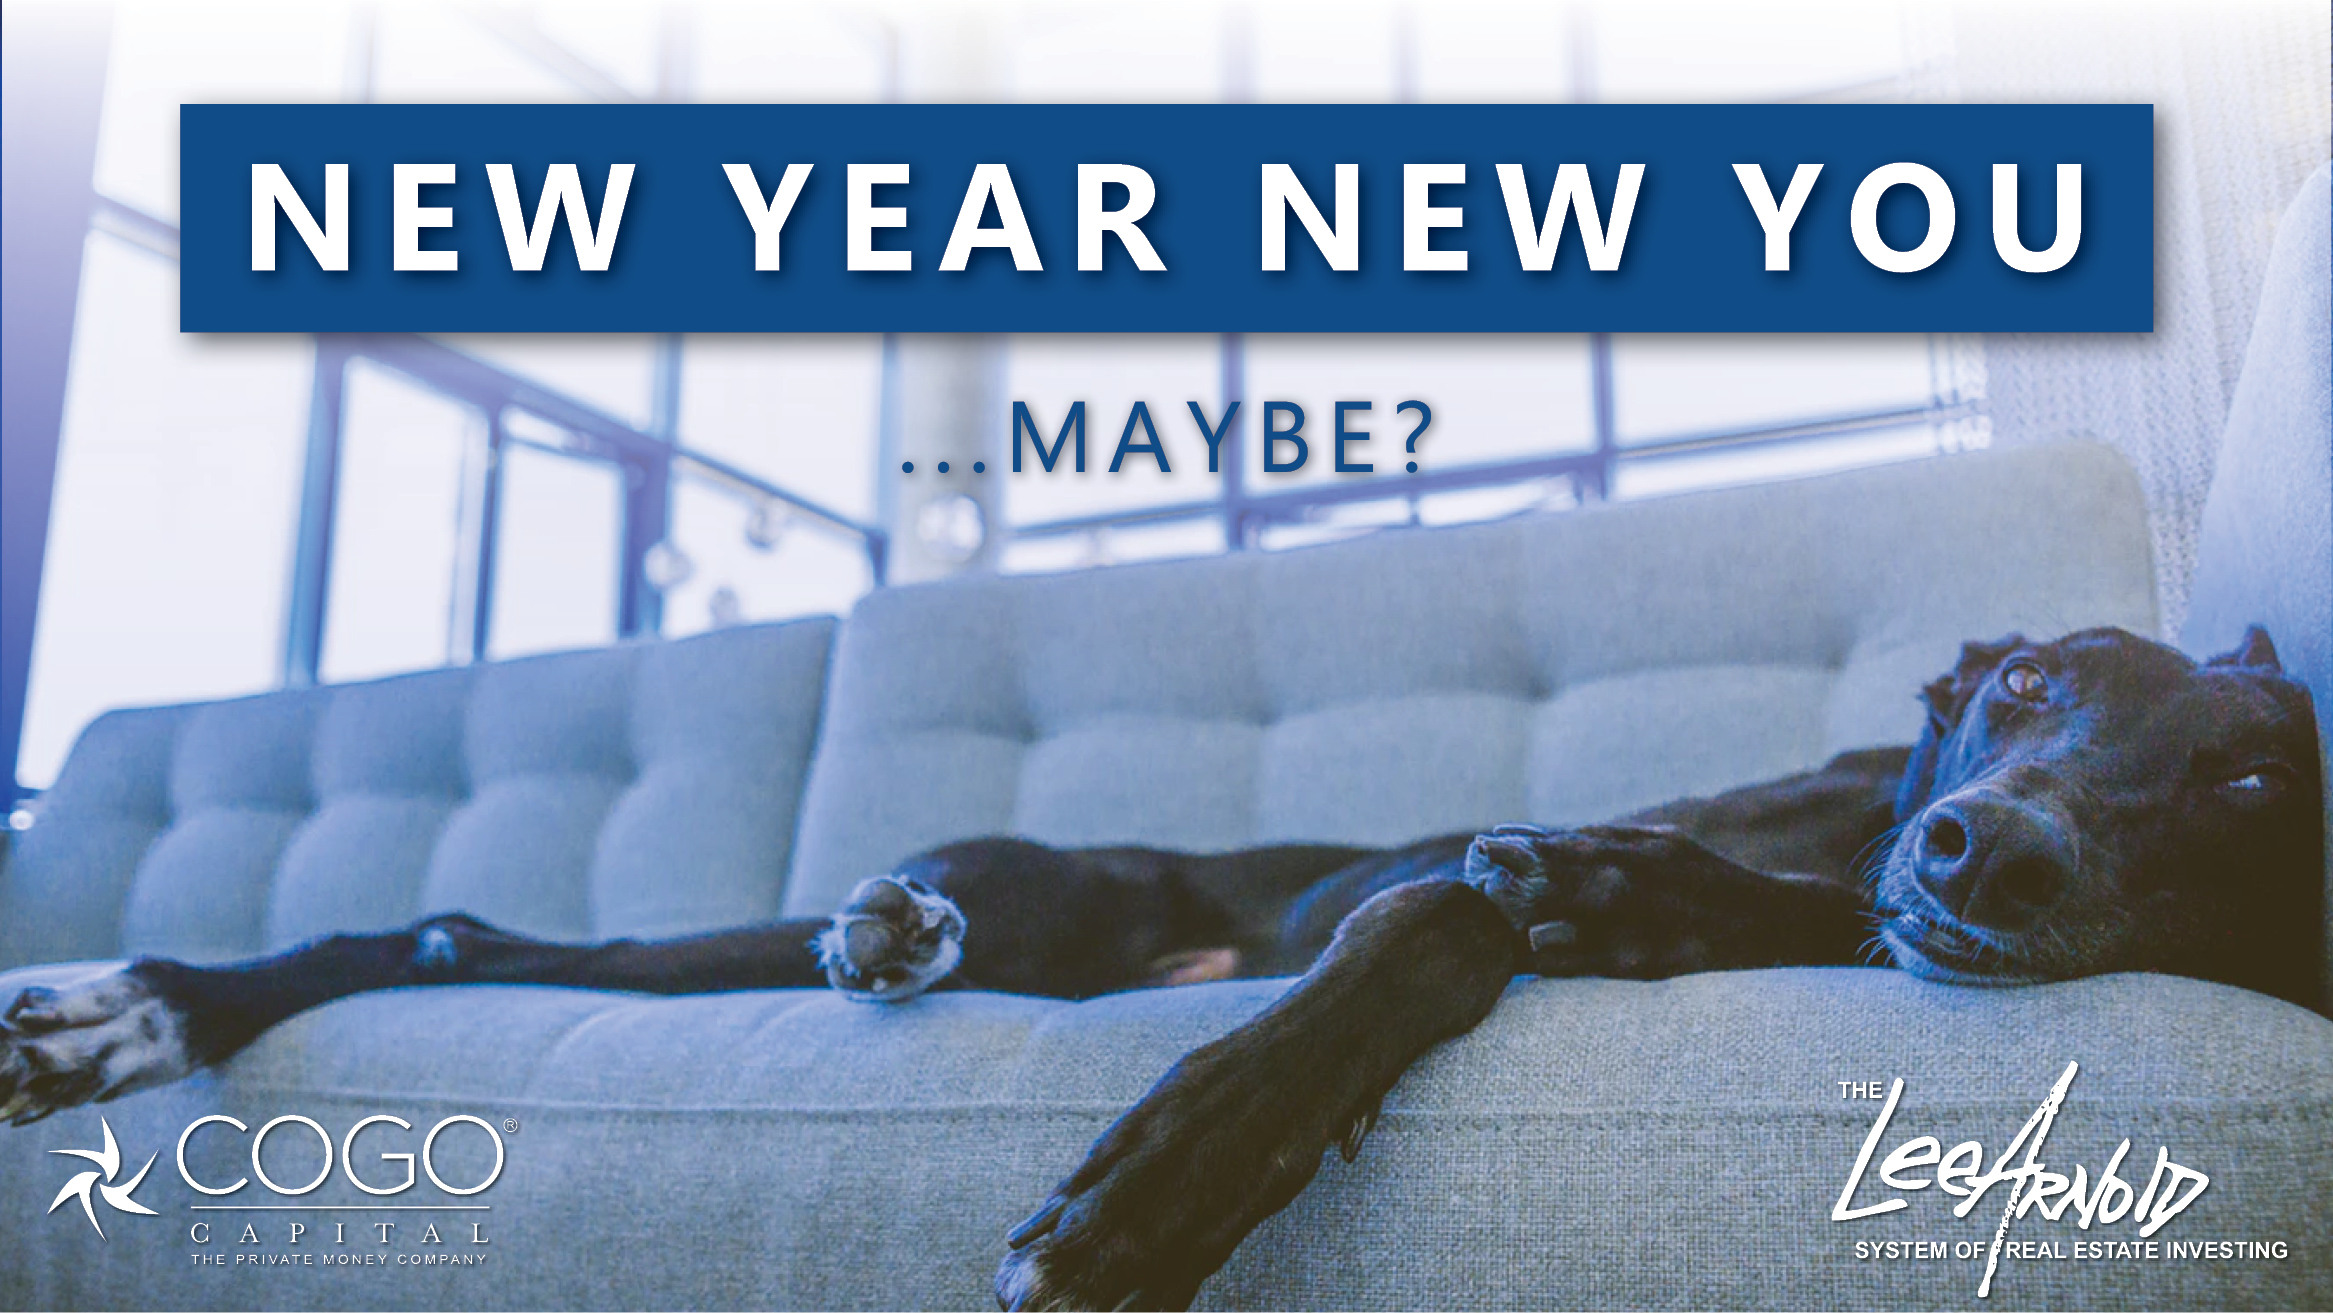 NEW YEAR NEW YOU…Maybe?